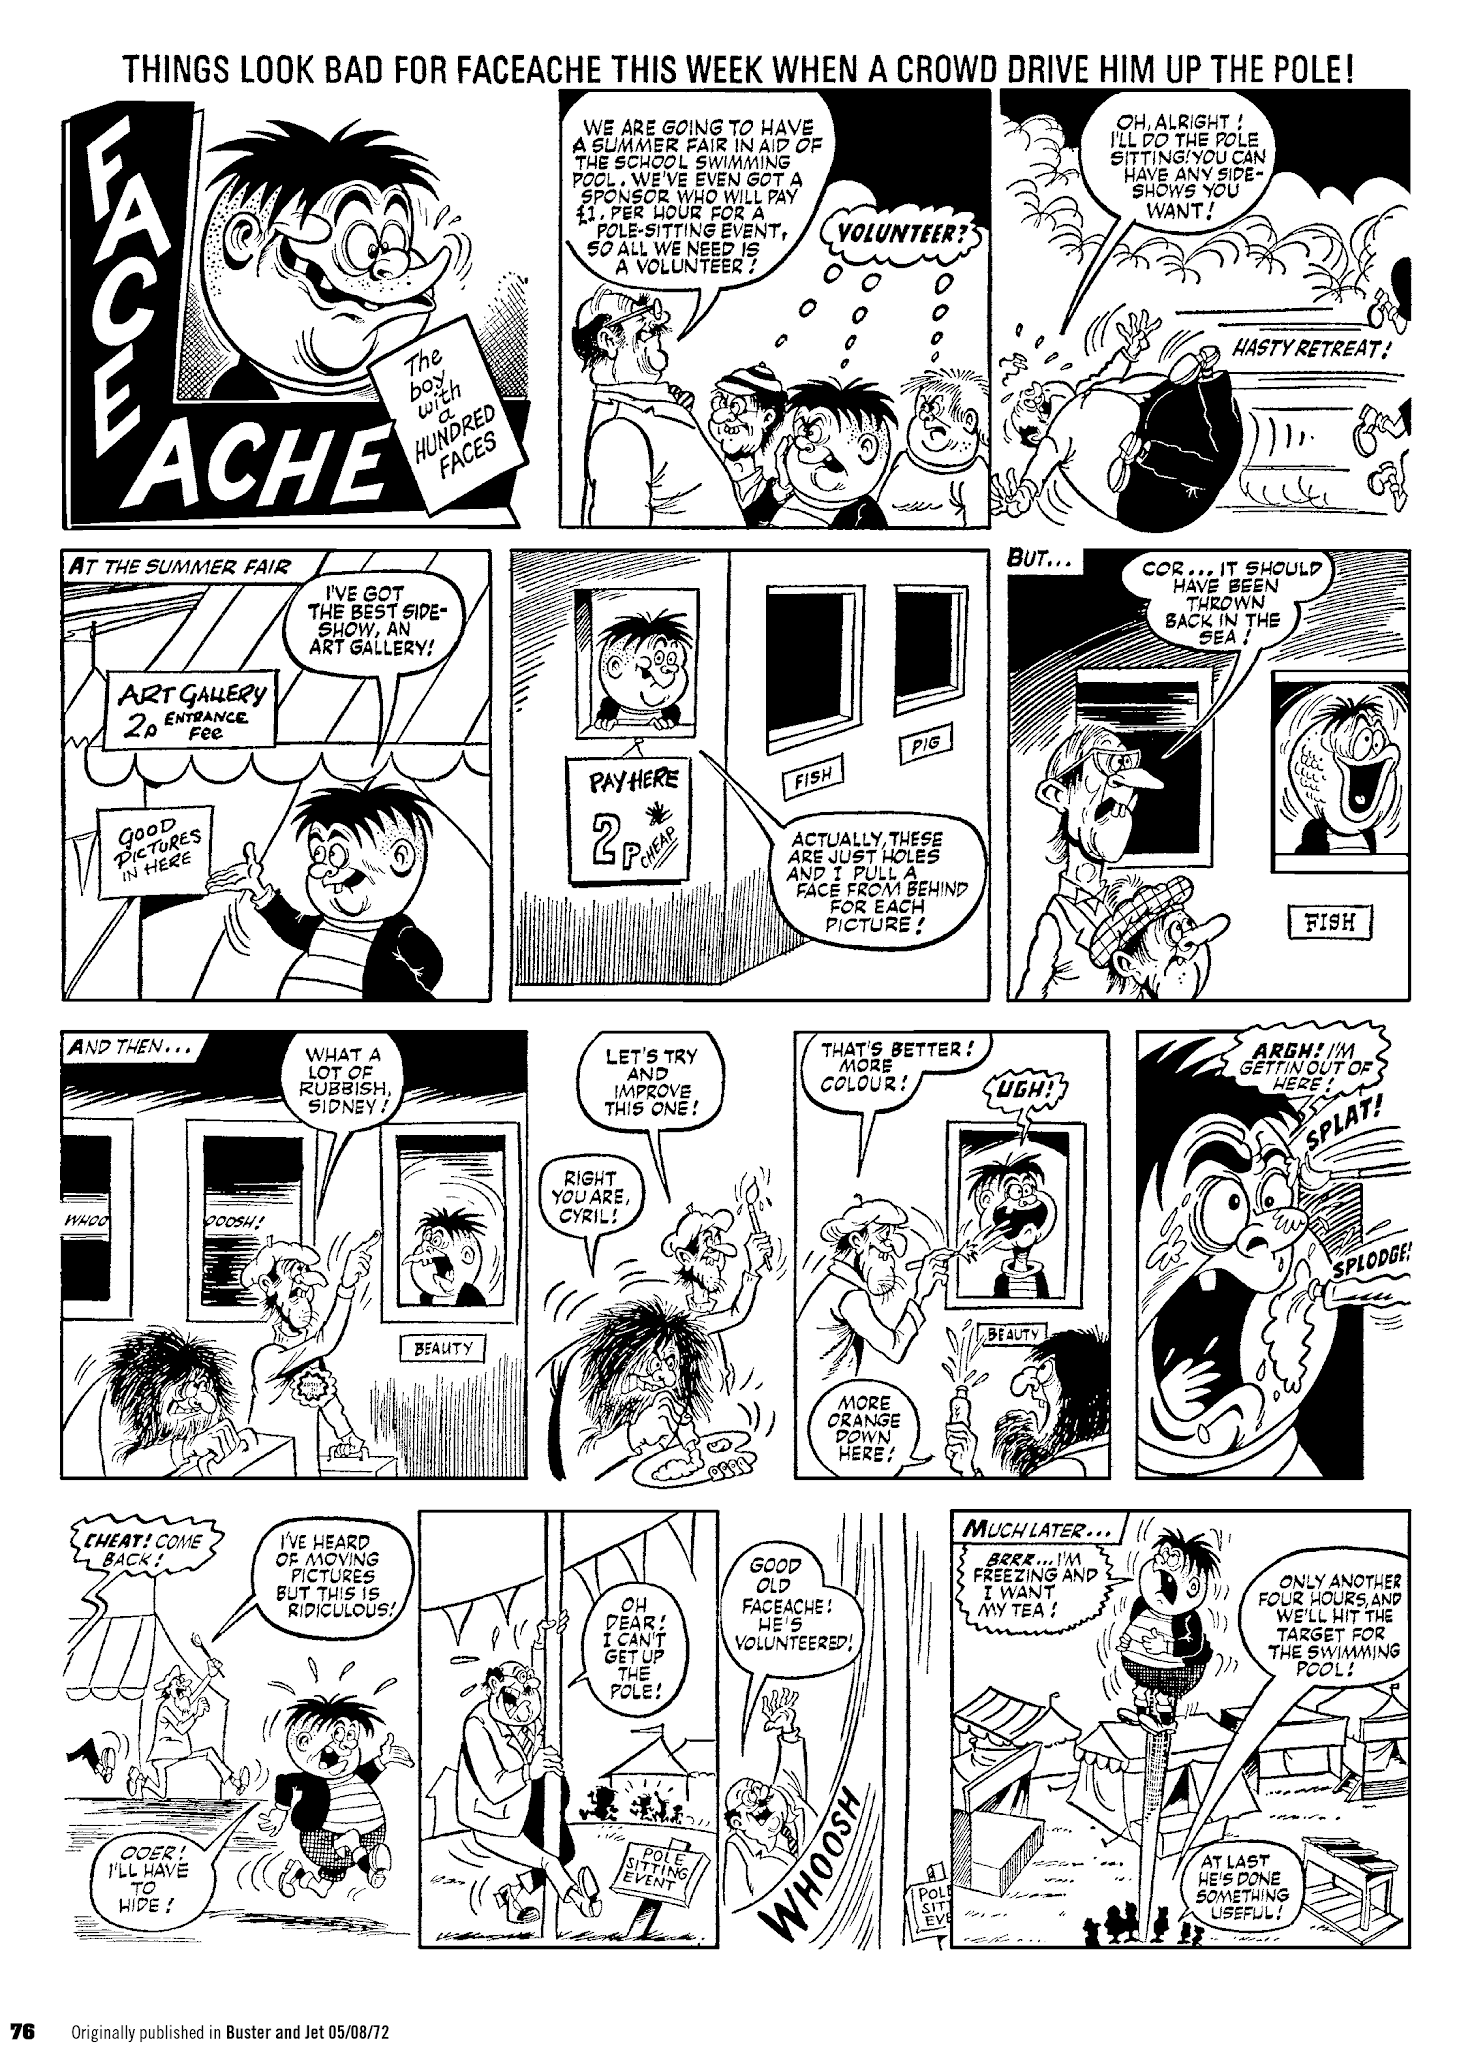 Read online Faceache: The First Hundred Scrunges comic -  Issue # TPB 1 - 78